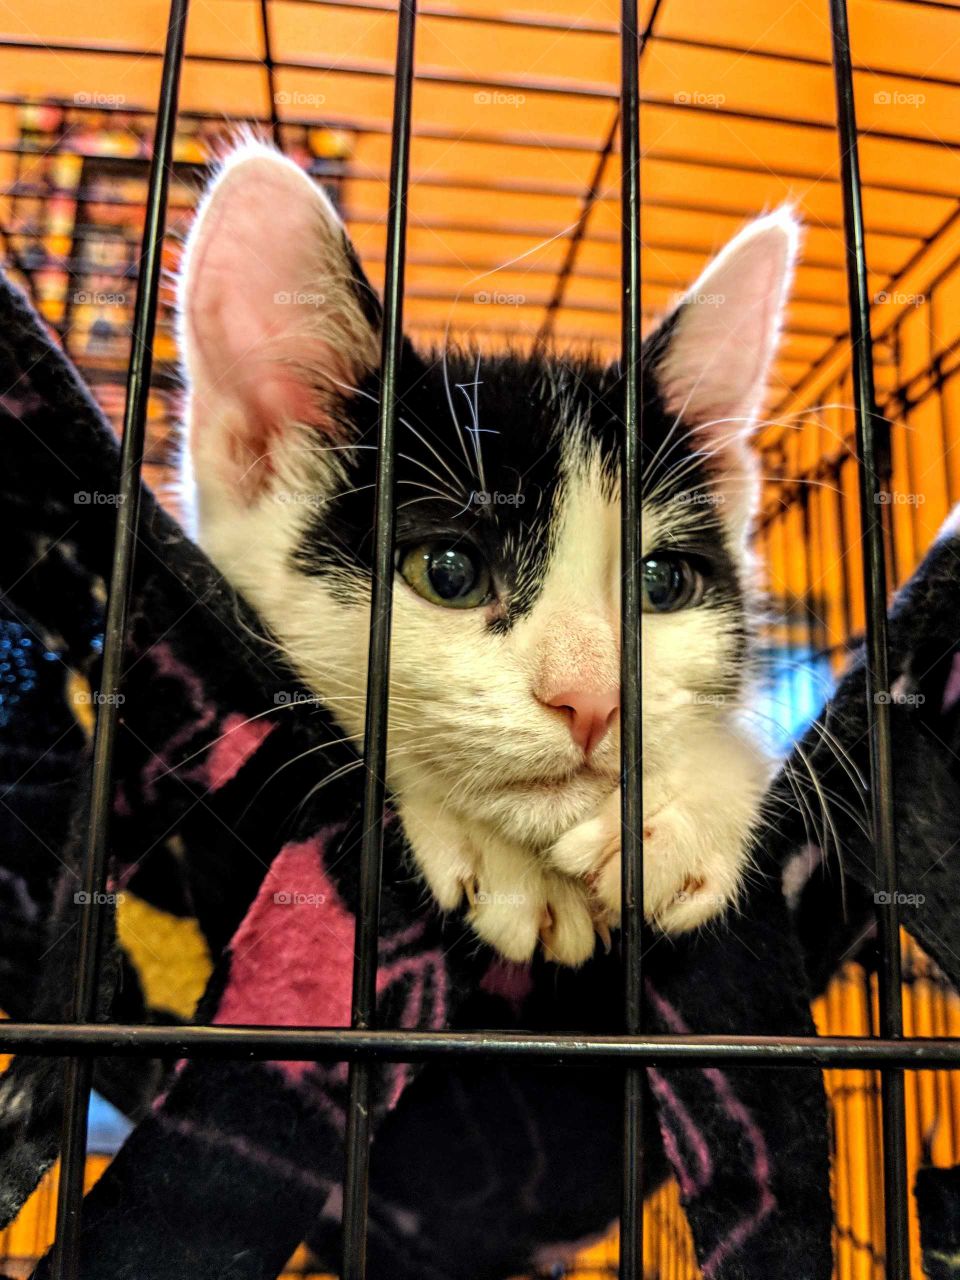 kitten in a shelter looking for a new home